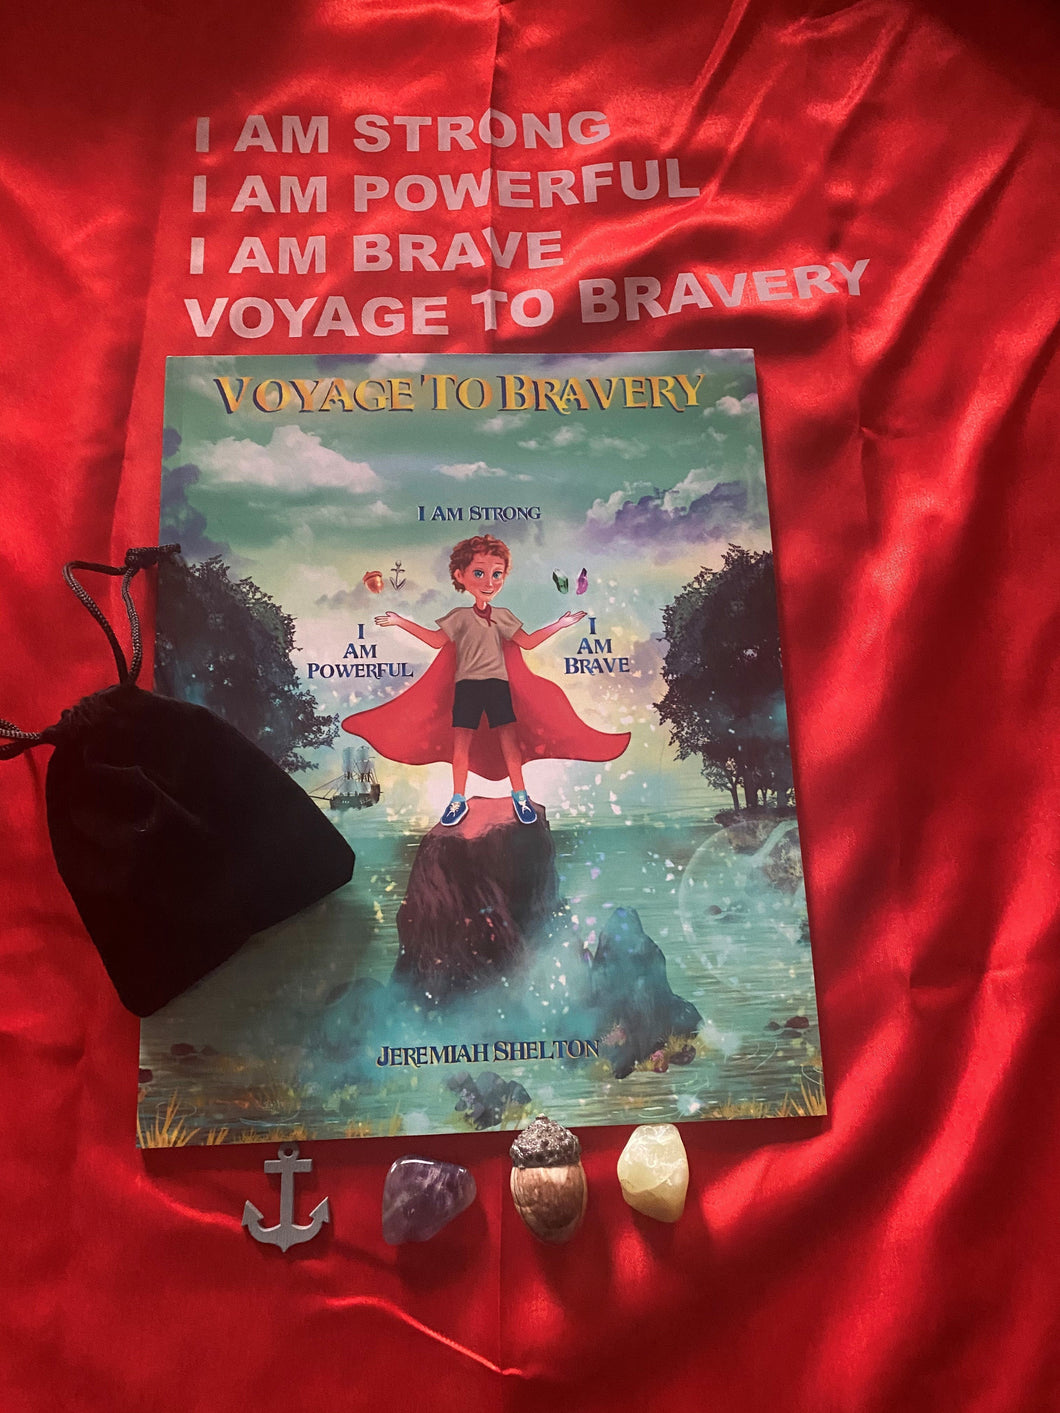 Voyage To Bravery Power Book Pack - Includes Book, Power Cape, & Power Pouch